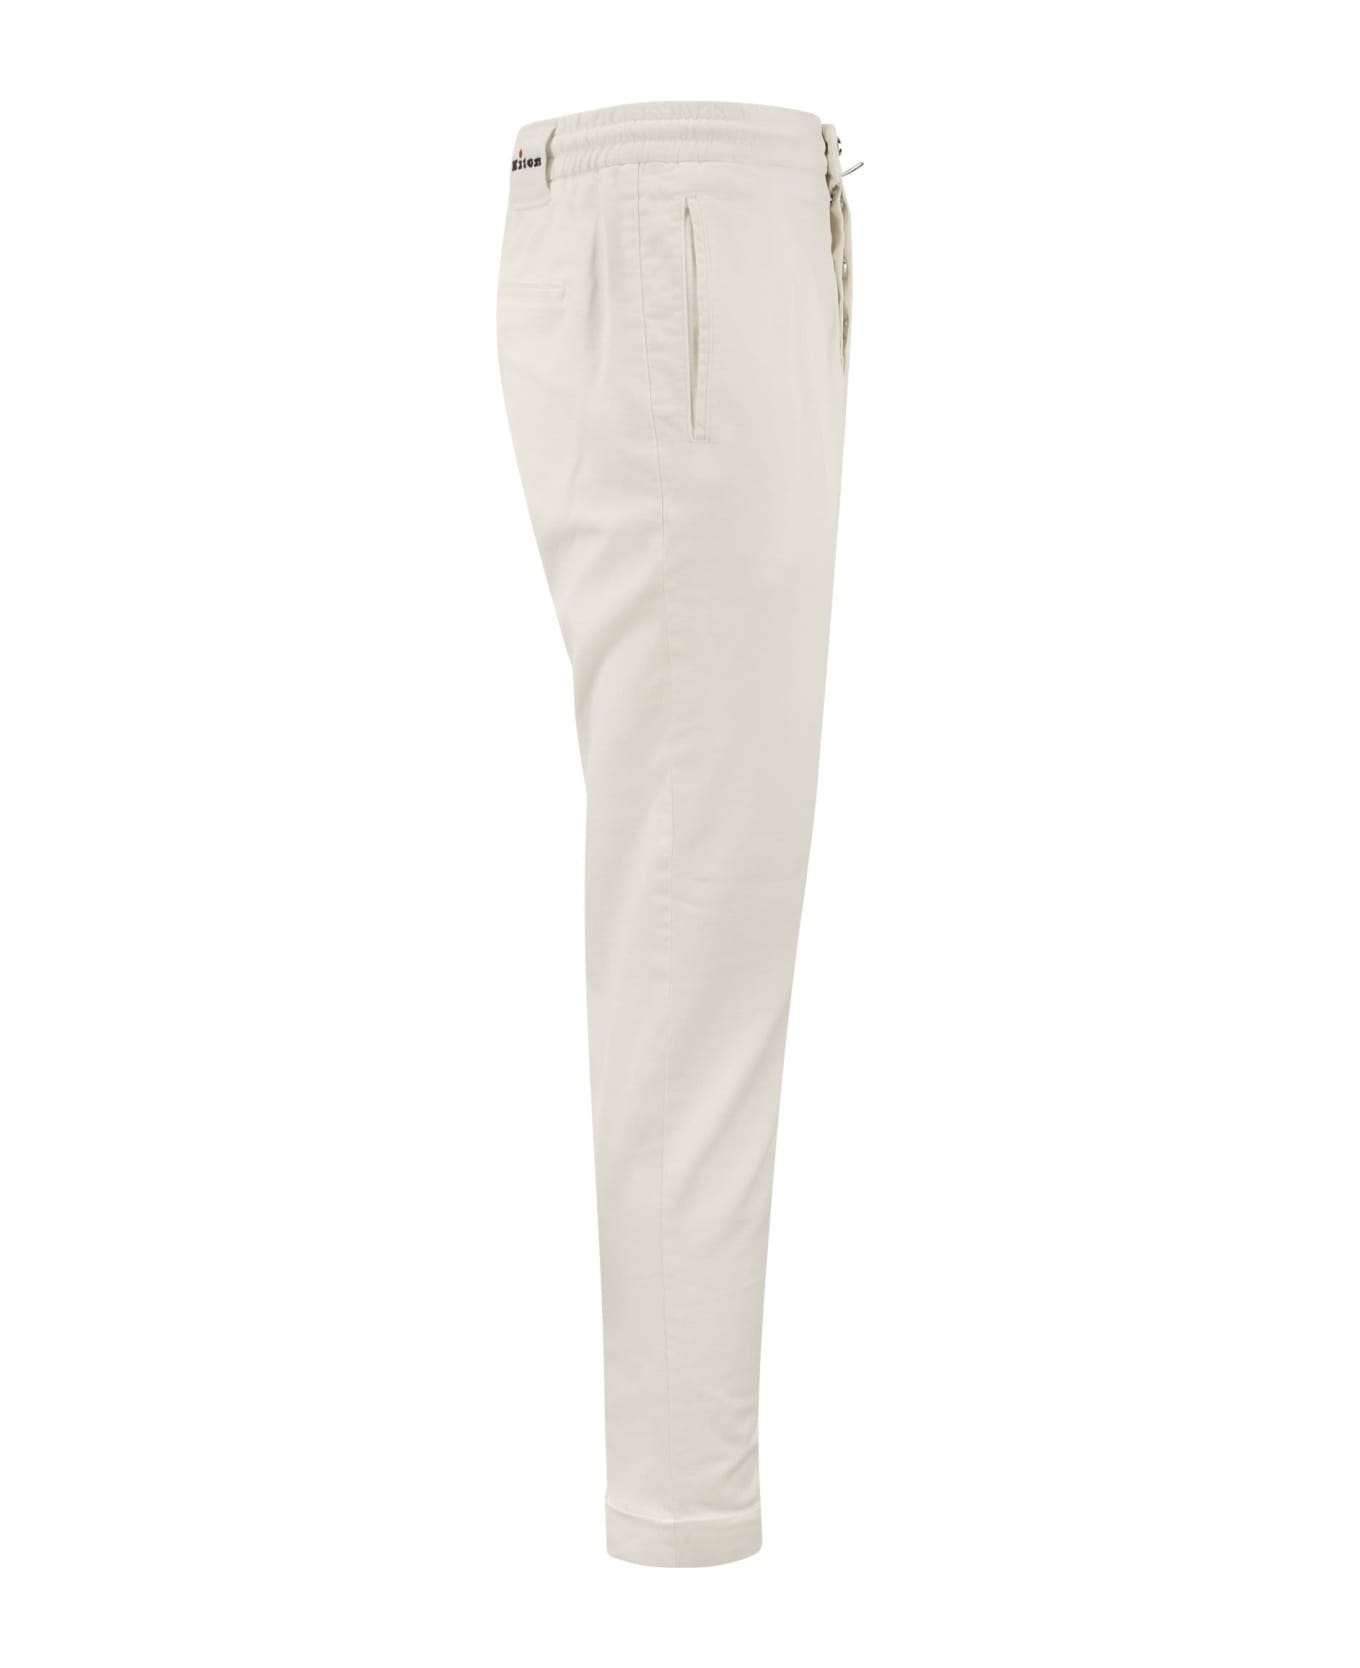 Kiton Trousers With Pence - Ivory